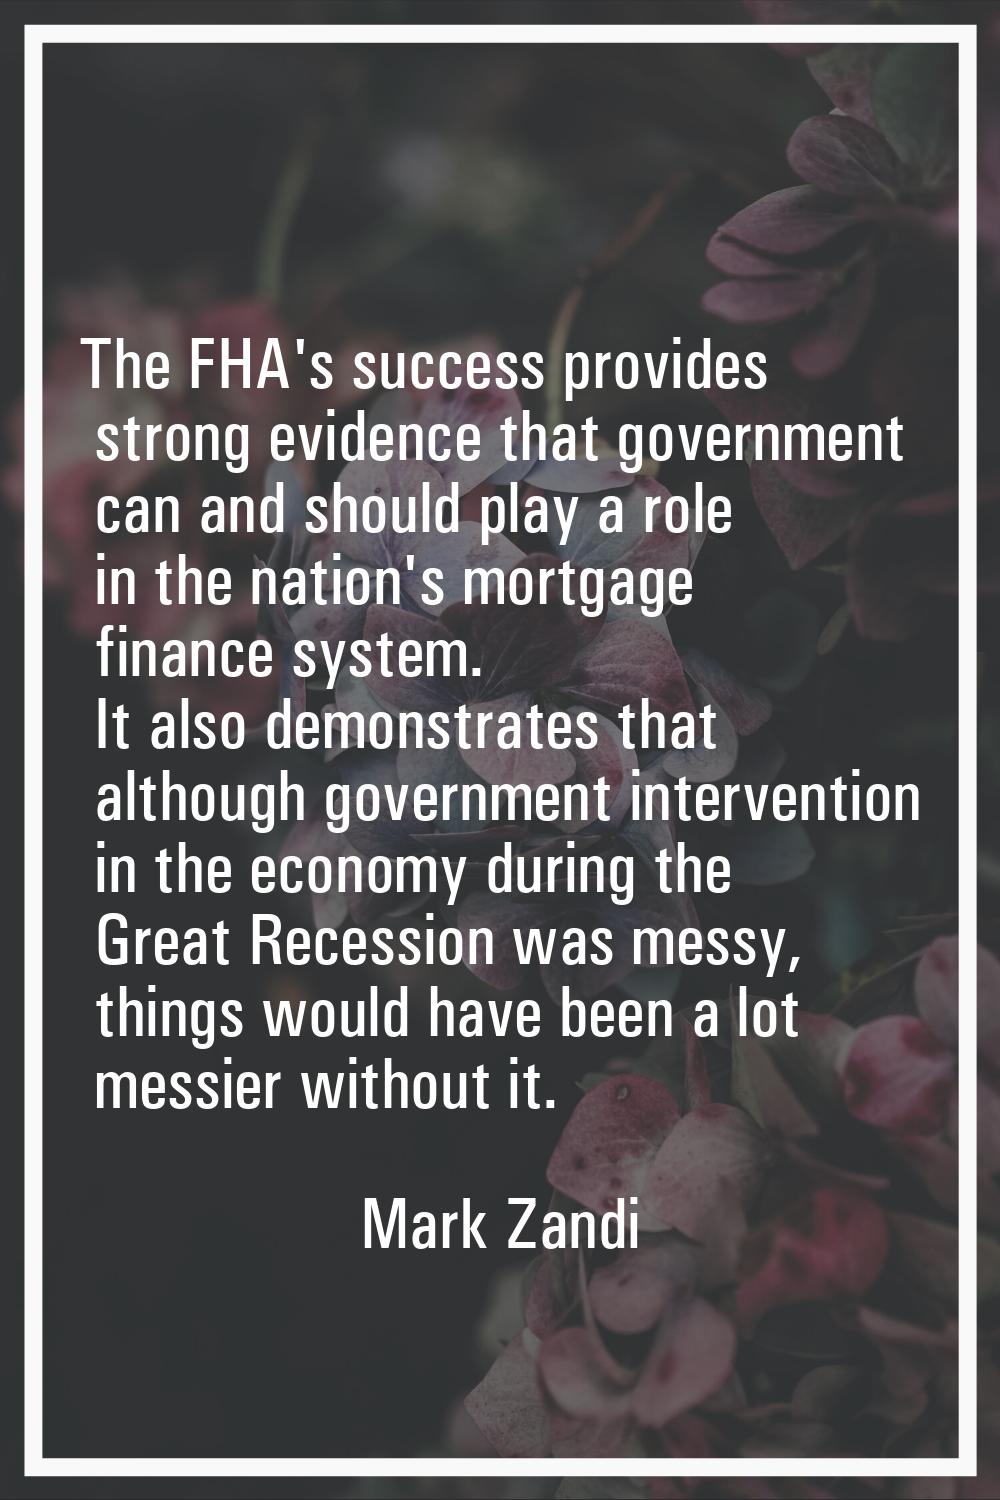 The FHA's success provides strong evidence that government can and should play a role in the nation